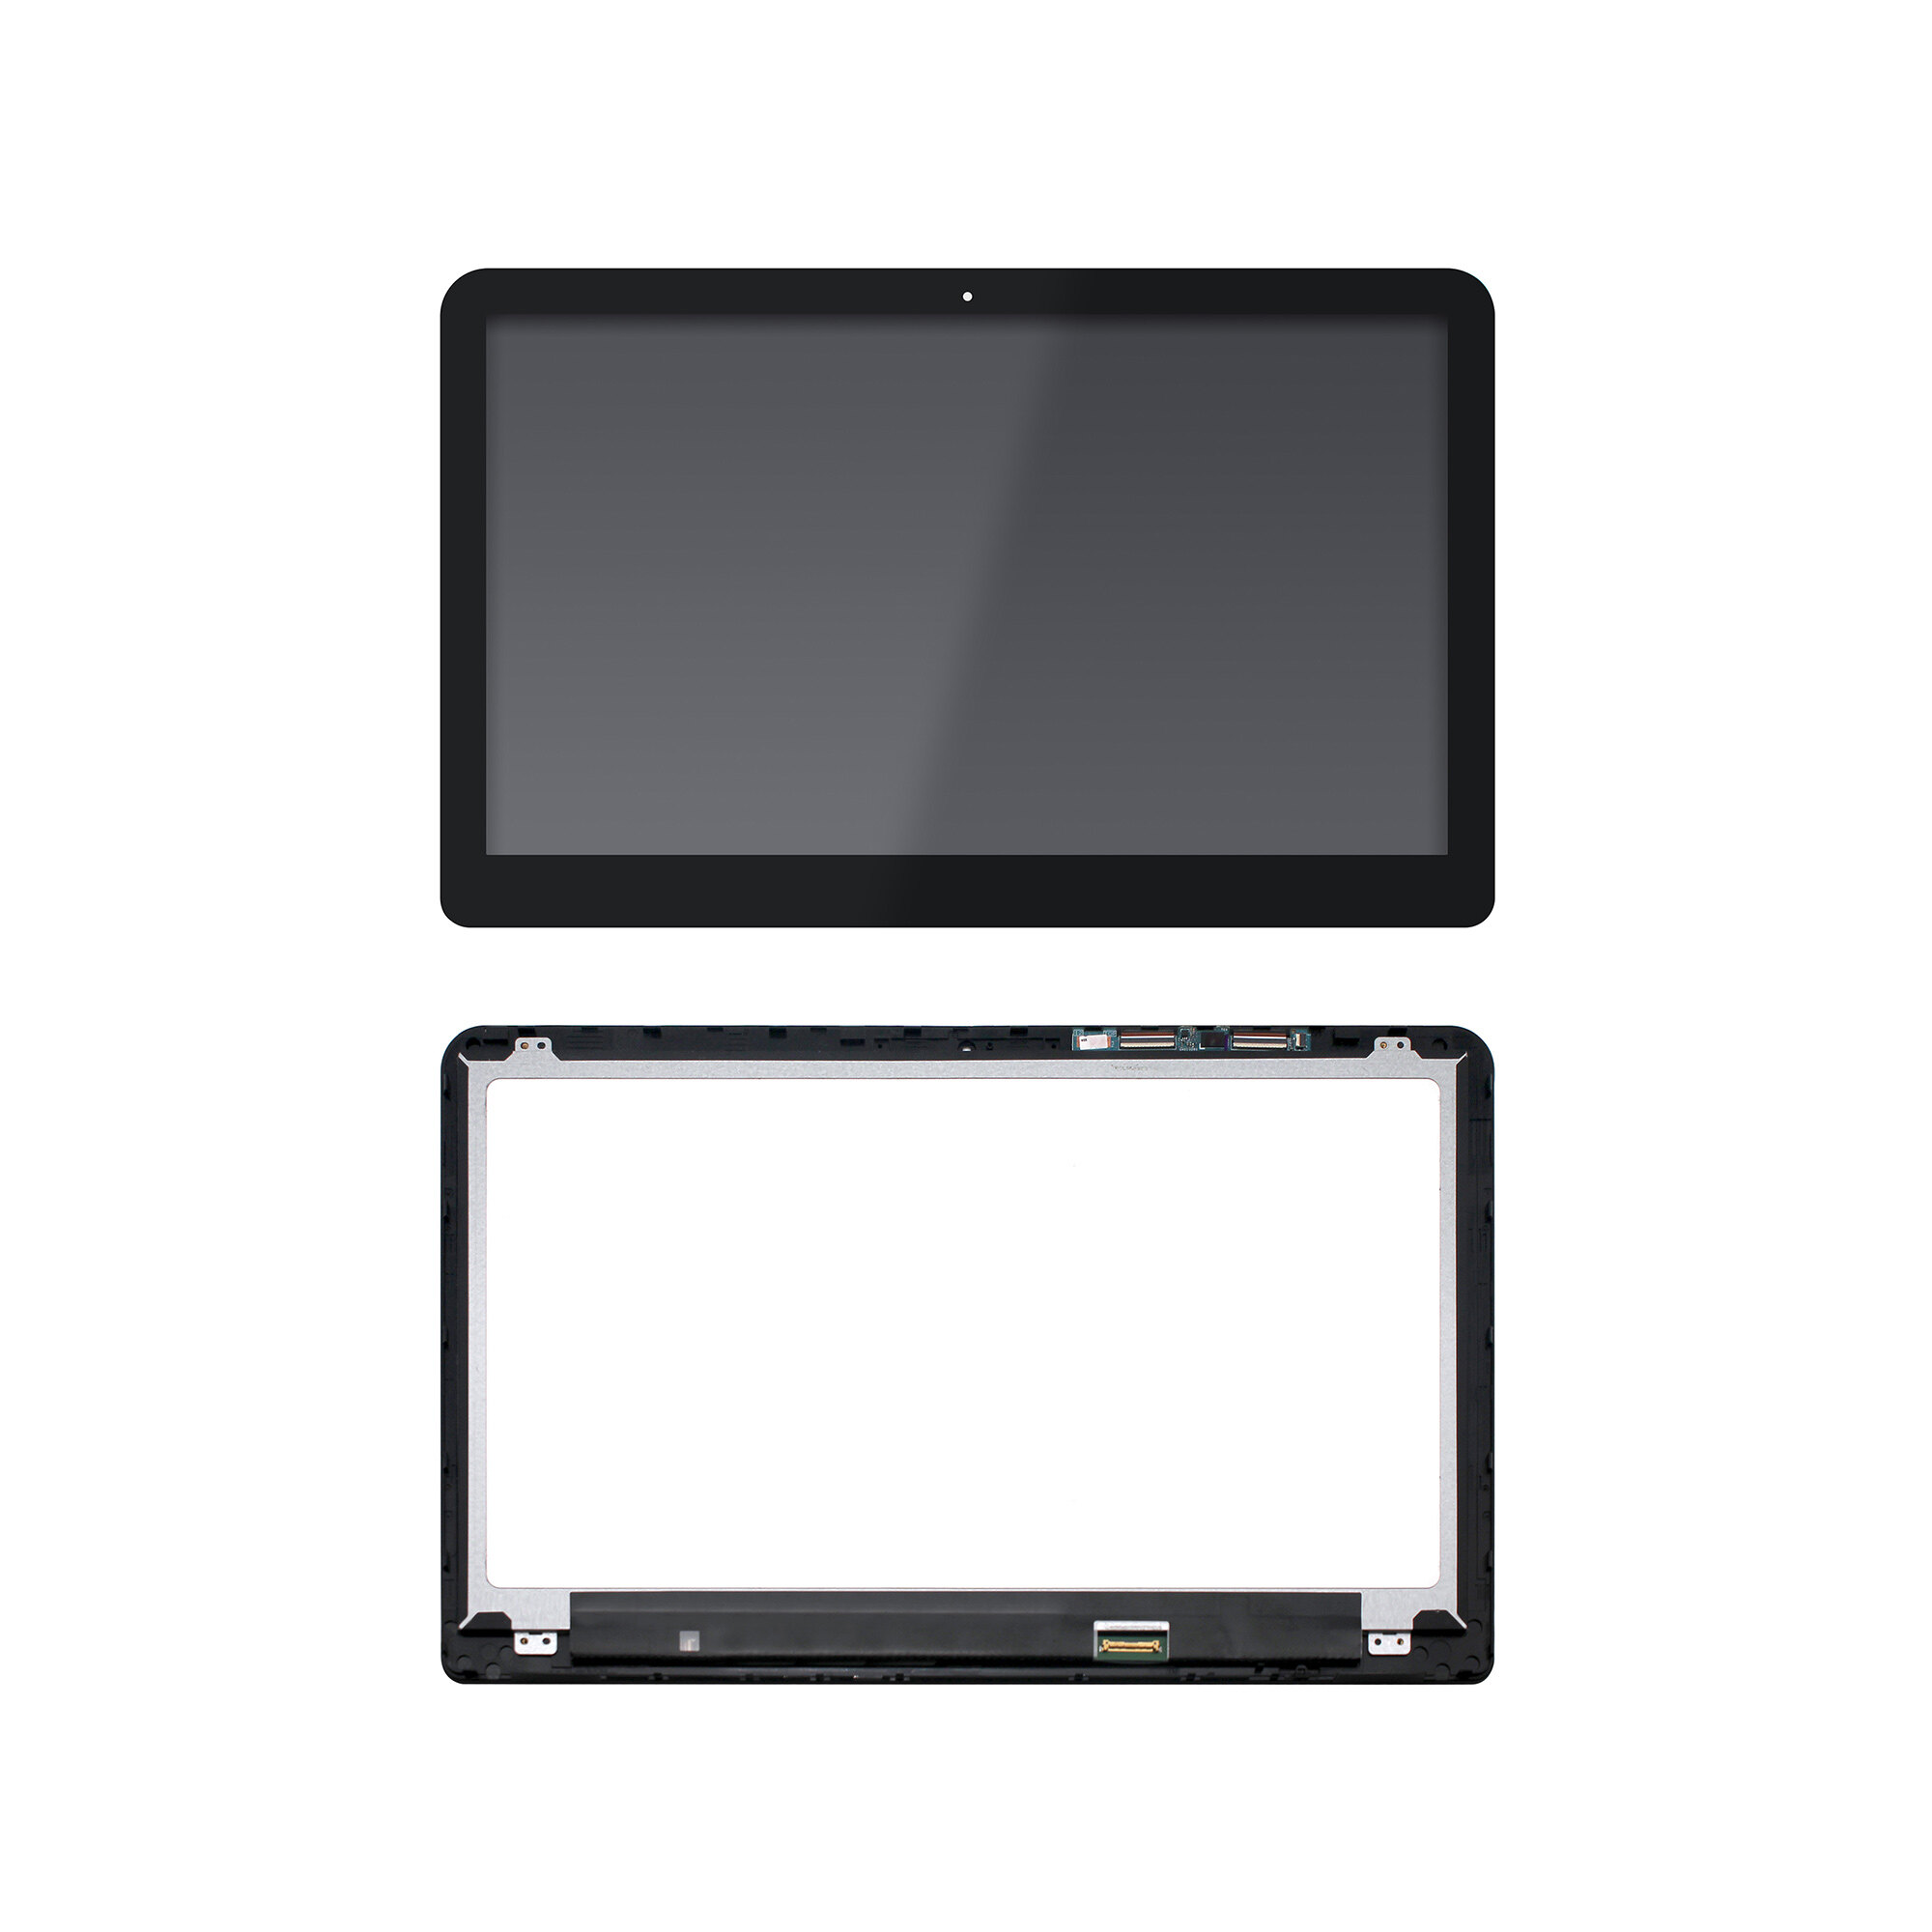 Kreplacement 862644-001 LCD TouchScreen Assembly With Bezel For HP Pavilion x360 15-bk